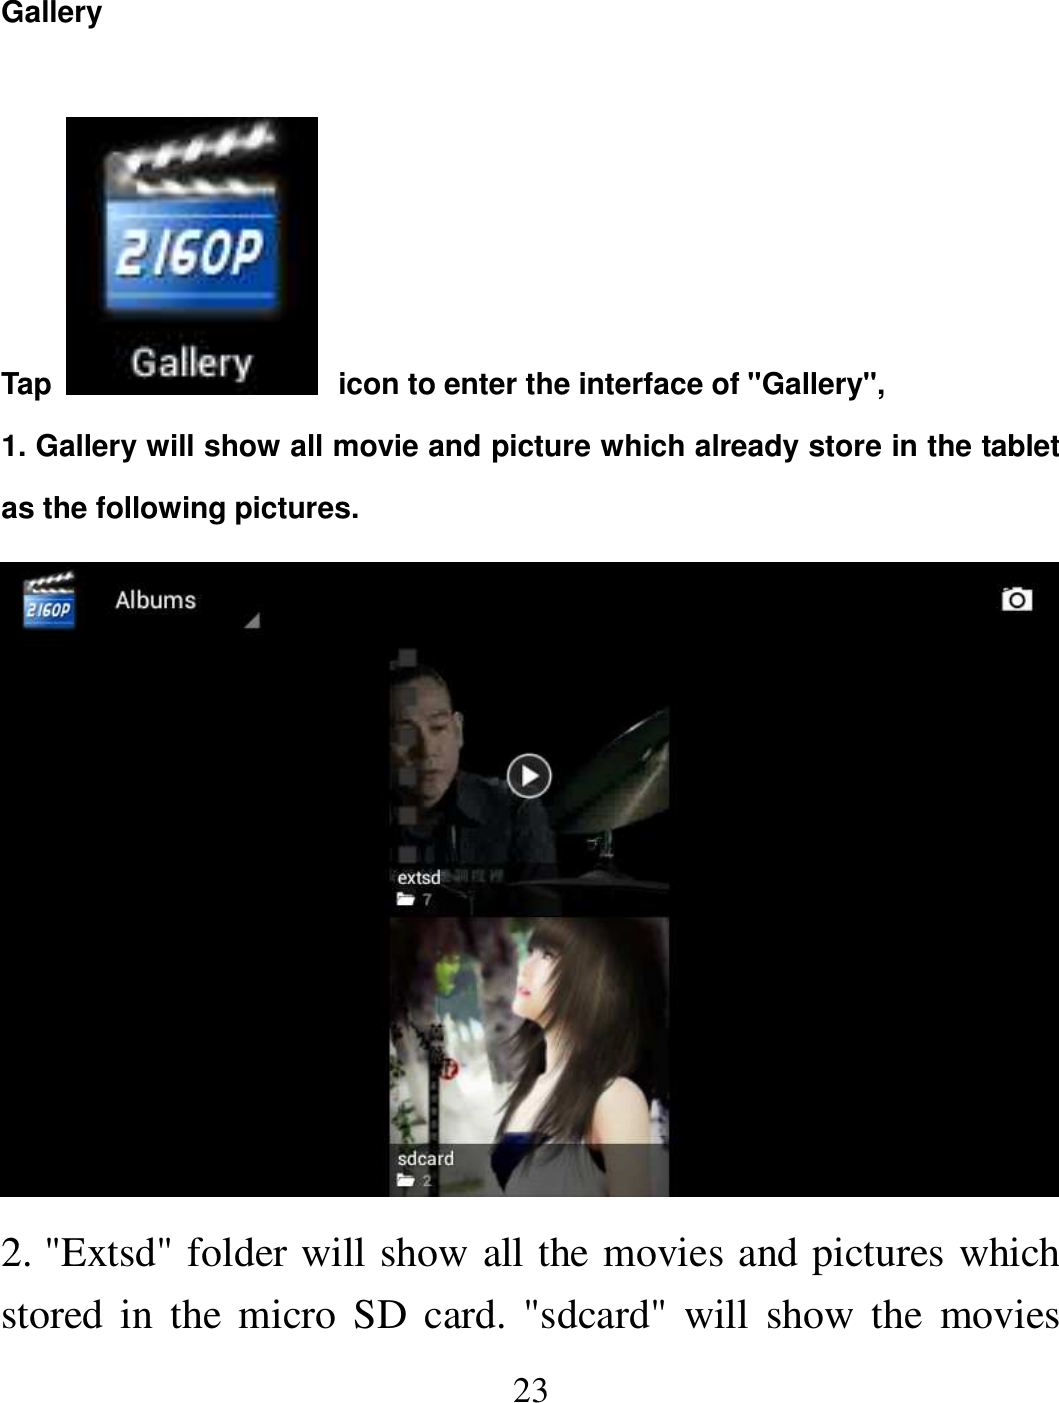   23 Gallery  Tap   icon to enter the interface of &quot;Gallery&quot;,   1. Gallery will show all movie and picture which already store in the tablet as the following pictures.  2. &quot;Extsd&quot; folder will show all the movies and pictures which stored in  the  micro SD  card.  &quot;sdcard&quot;  will  show the  movies 